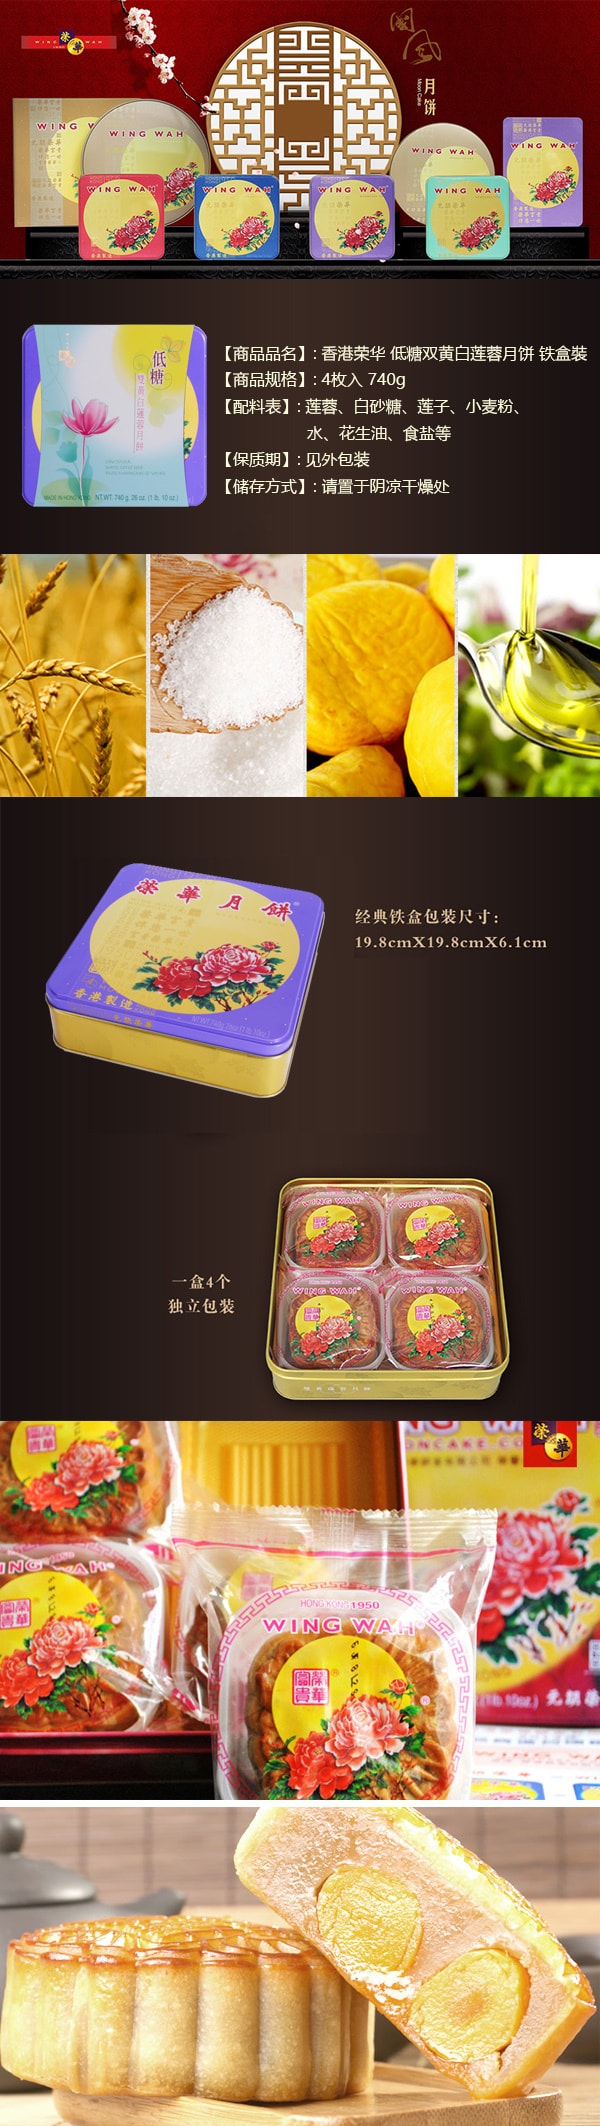 Low Sugar White Lotus Seed Paste Mooncake With 2 Yolks 4pcs Gift Box 740g 【Delivery Date: End of August】